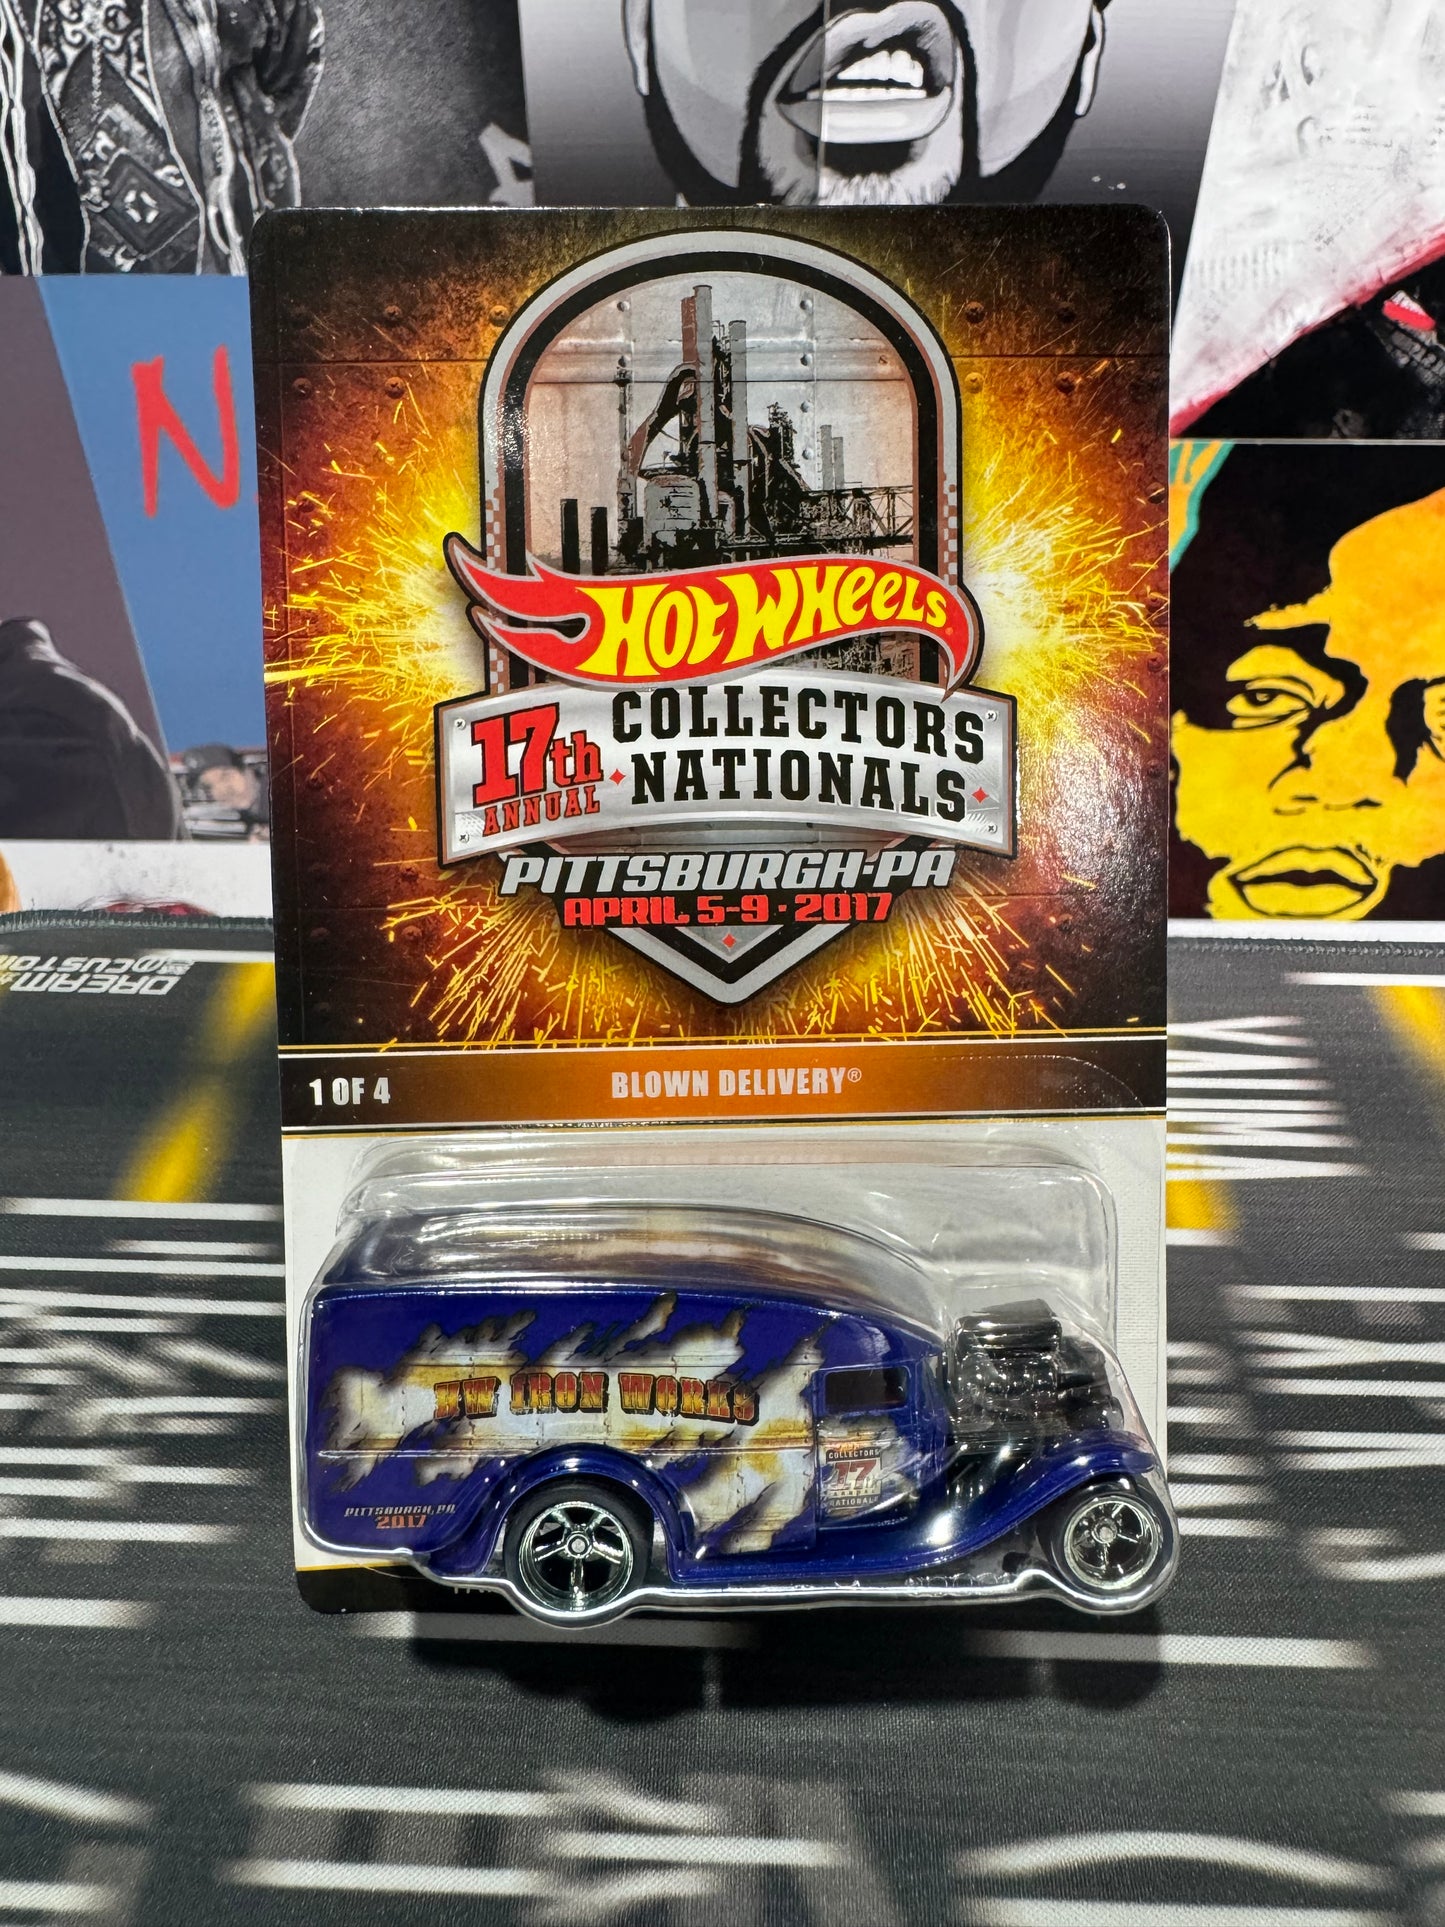 Hot Wheels 17th Collectors Nationals Blown Delivery